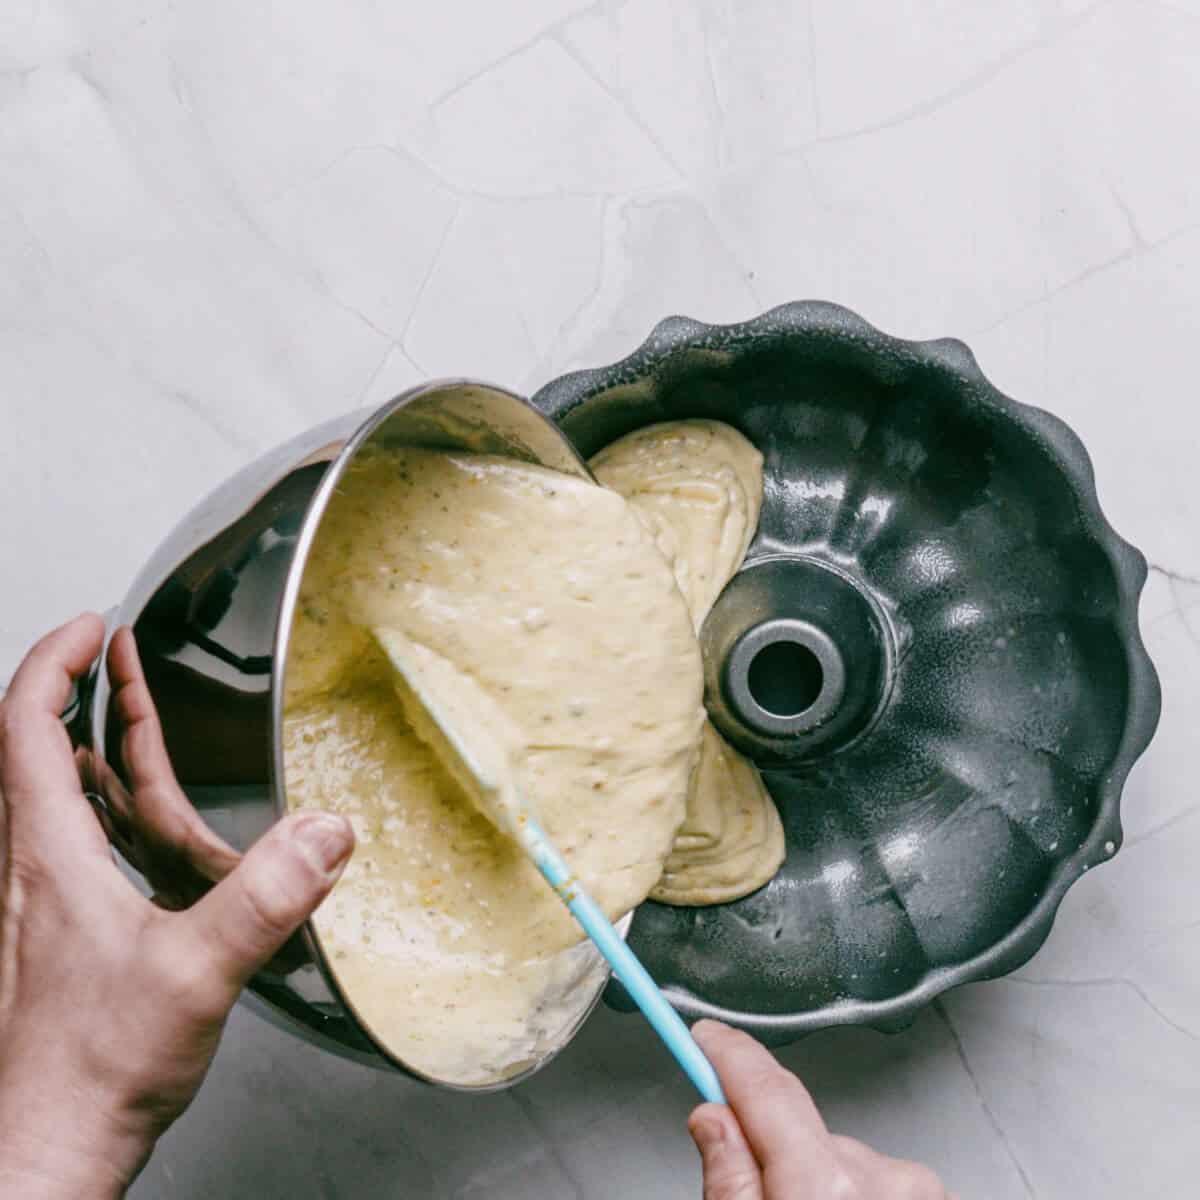 pouring cake batter into a fluted bundt pan.